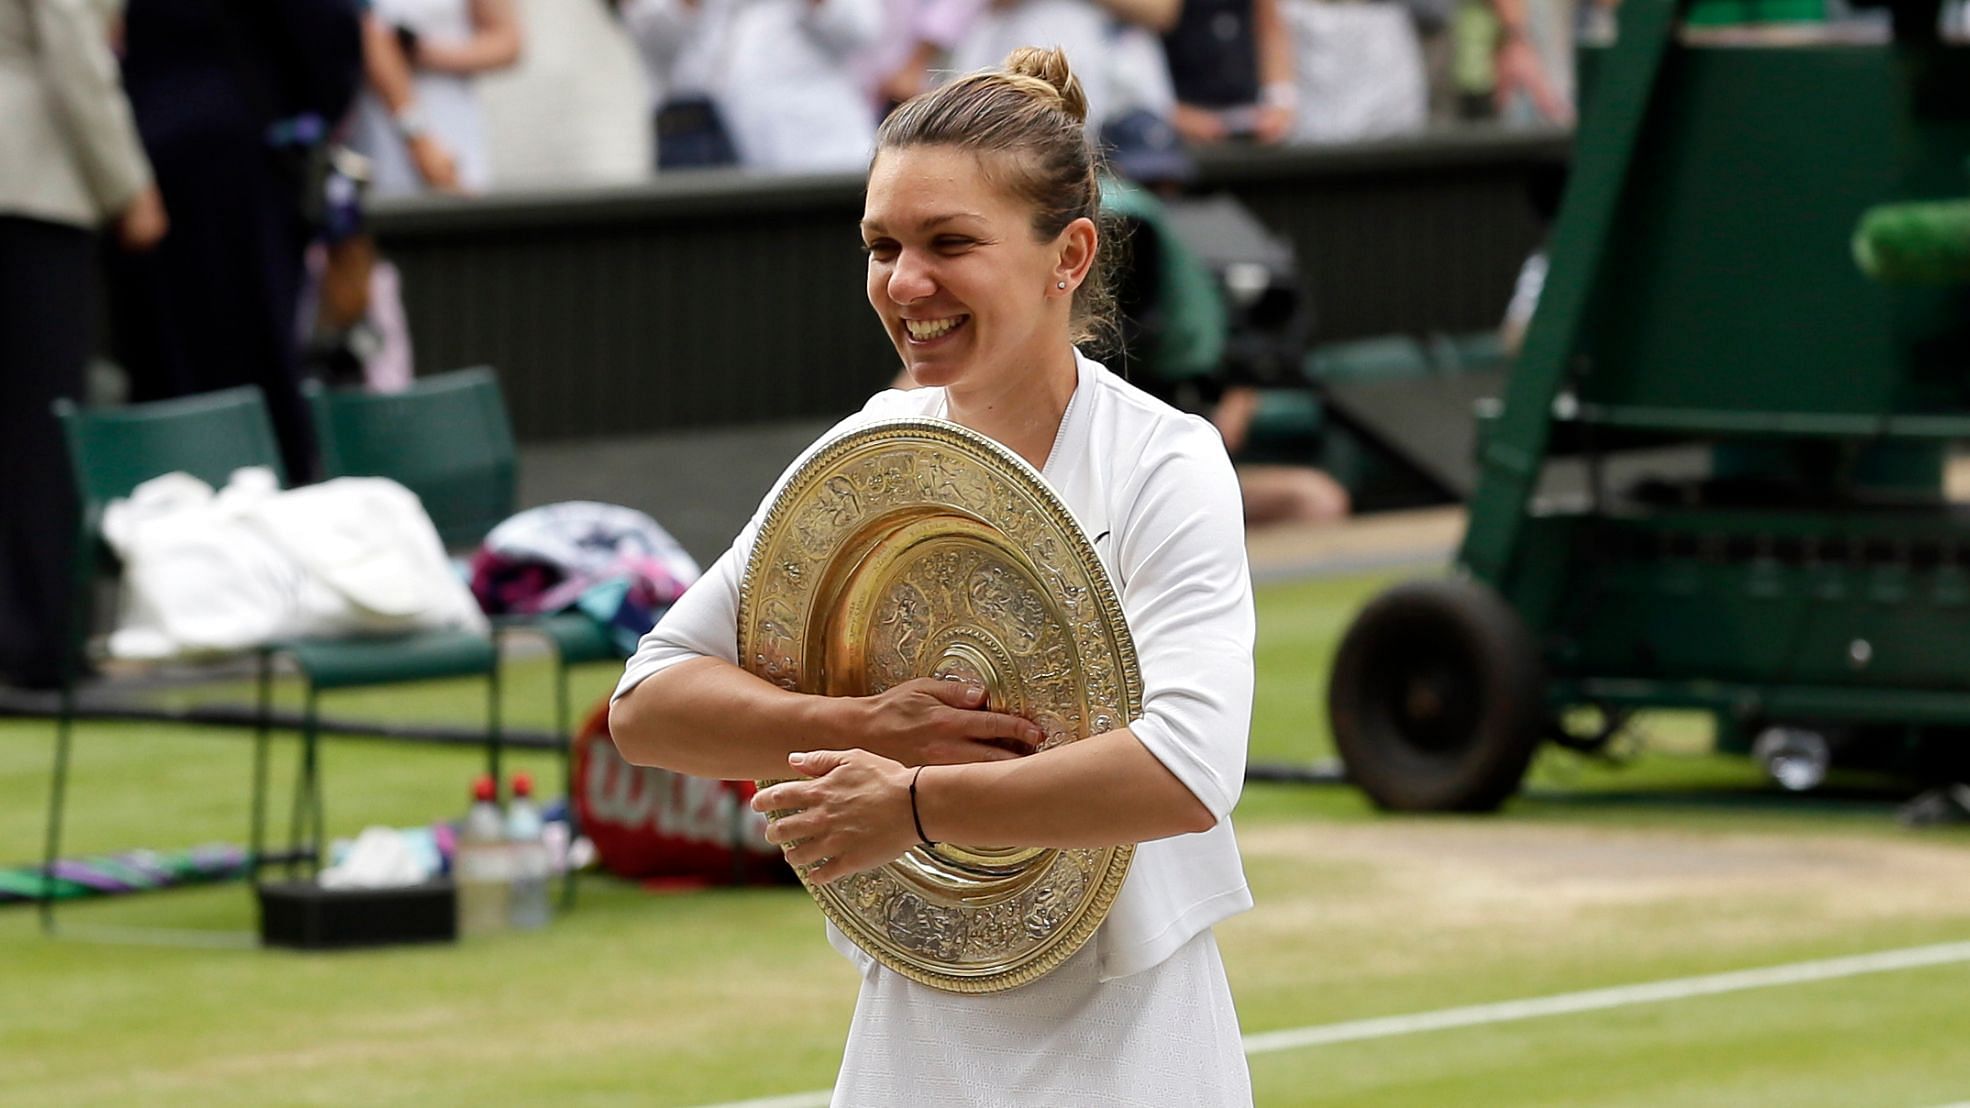 Seventh seed Simona Halep crushed eight-time winner Serena Williams in straight sets to win her maiden Wimbledon title